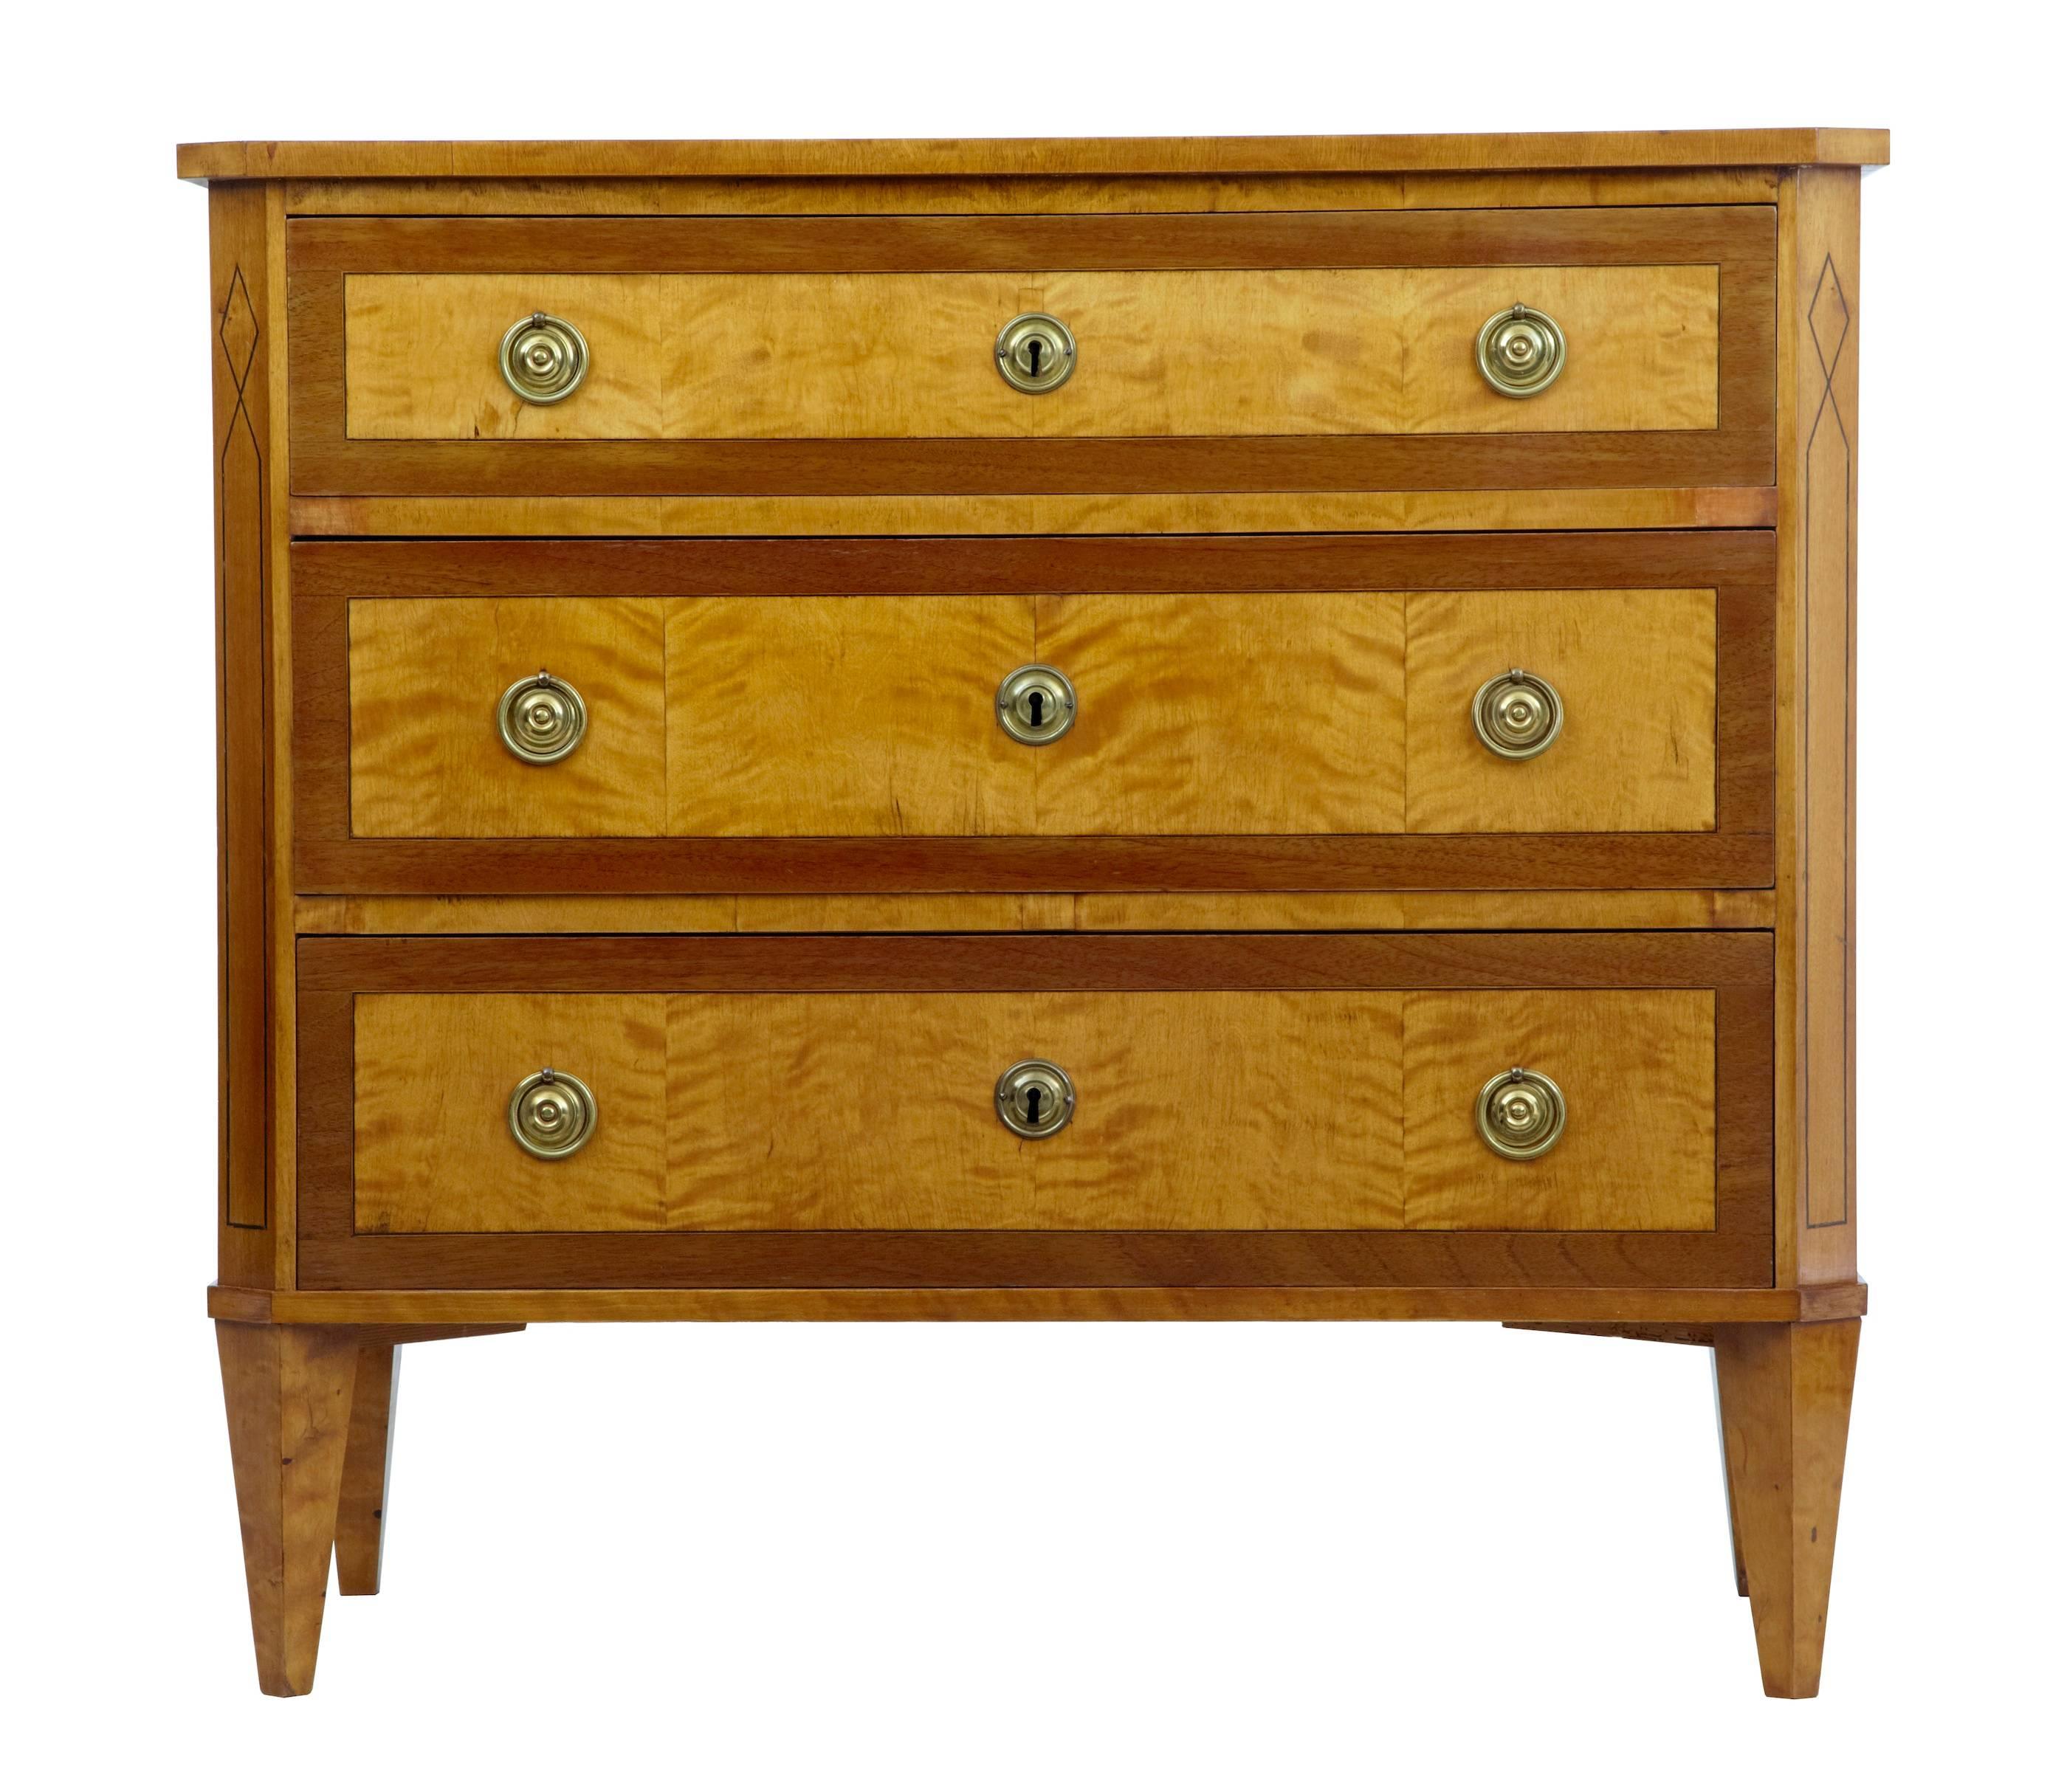 Excellent quality chest of fine proportions, circa 1890.
Three drawers cross banded with mahogany.
Good rich colour and patina with stringing to the canted corners.
Standing on tapered legs.

Height: 33